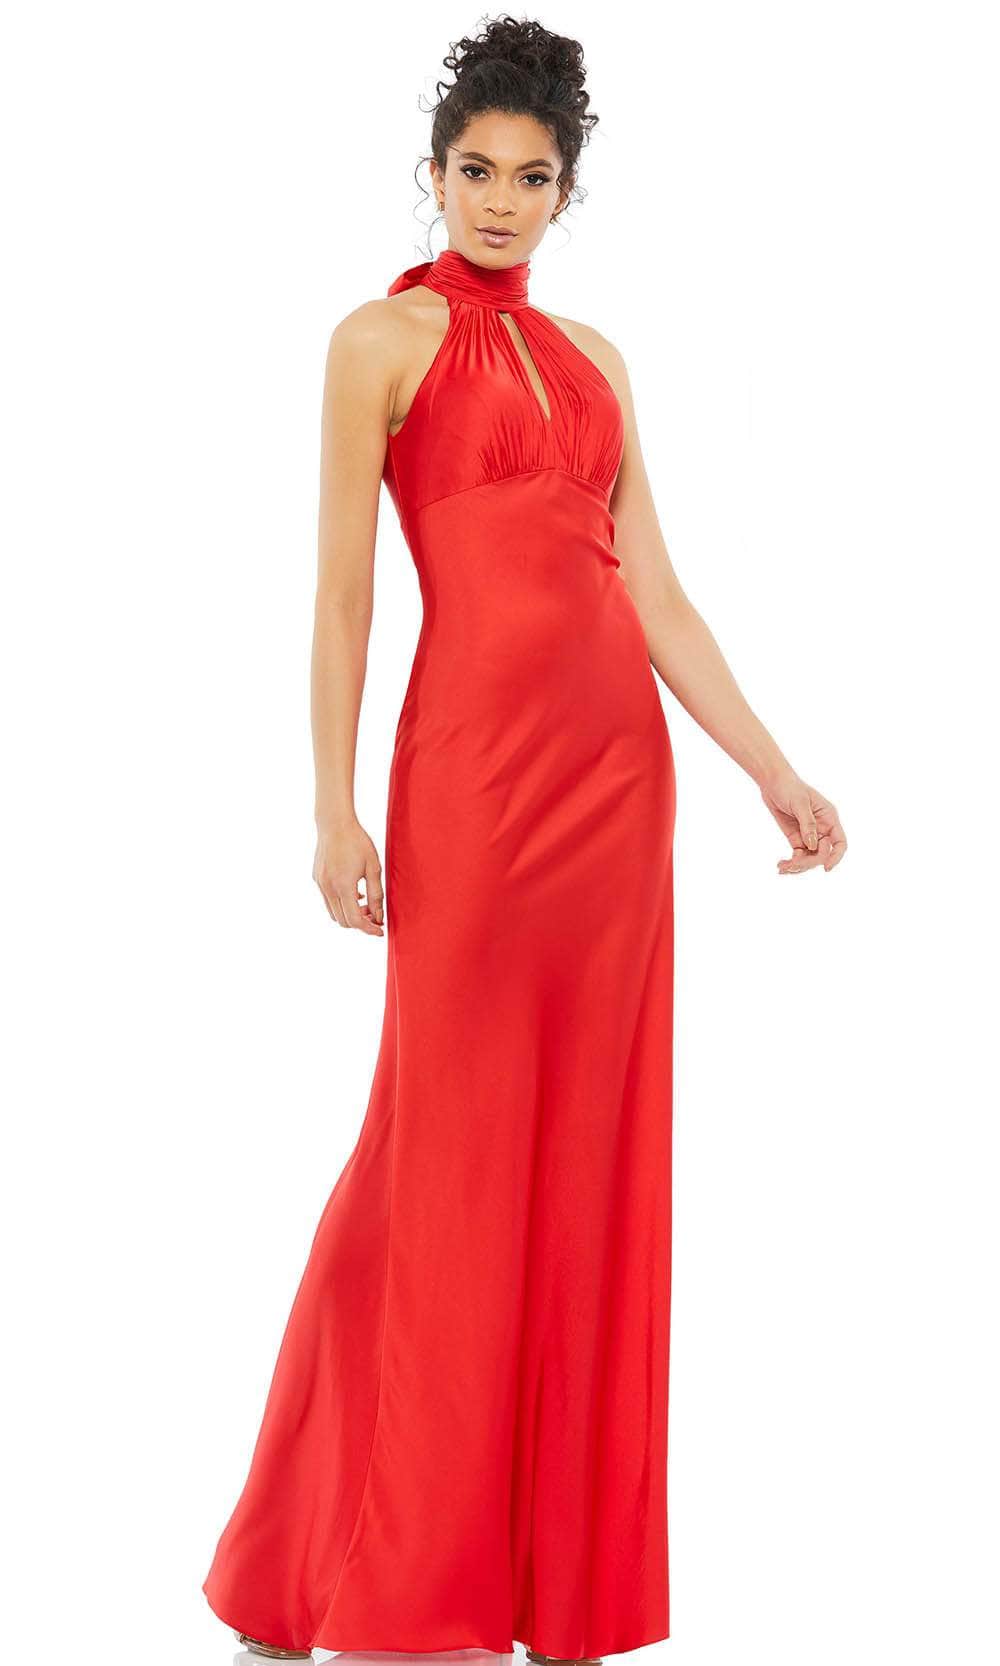 Ieena Duggal 49520 - Ruched High Halter Evening Gown Evening Dresses 0 / Red